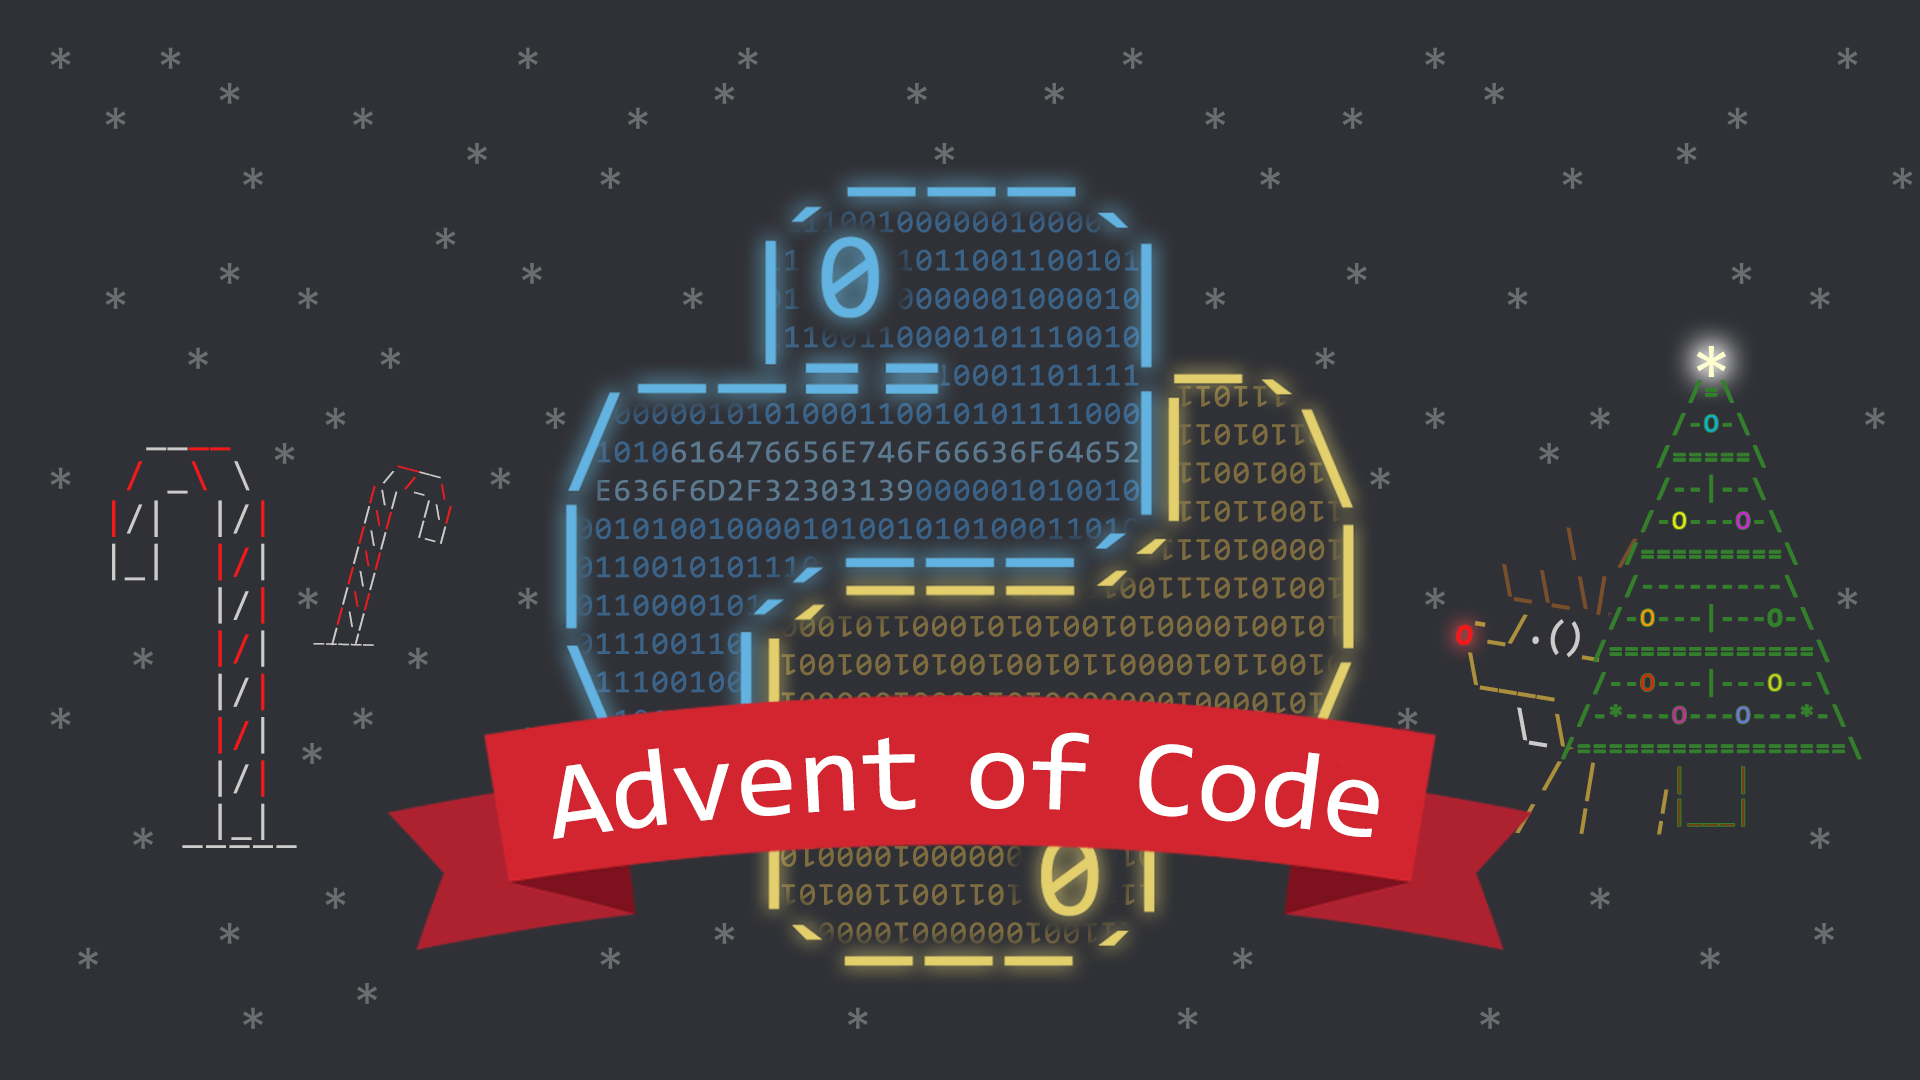 image from Advent of Code from a community event organizer's perspective